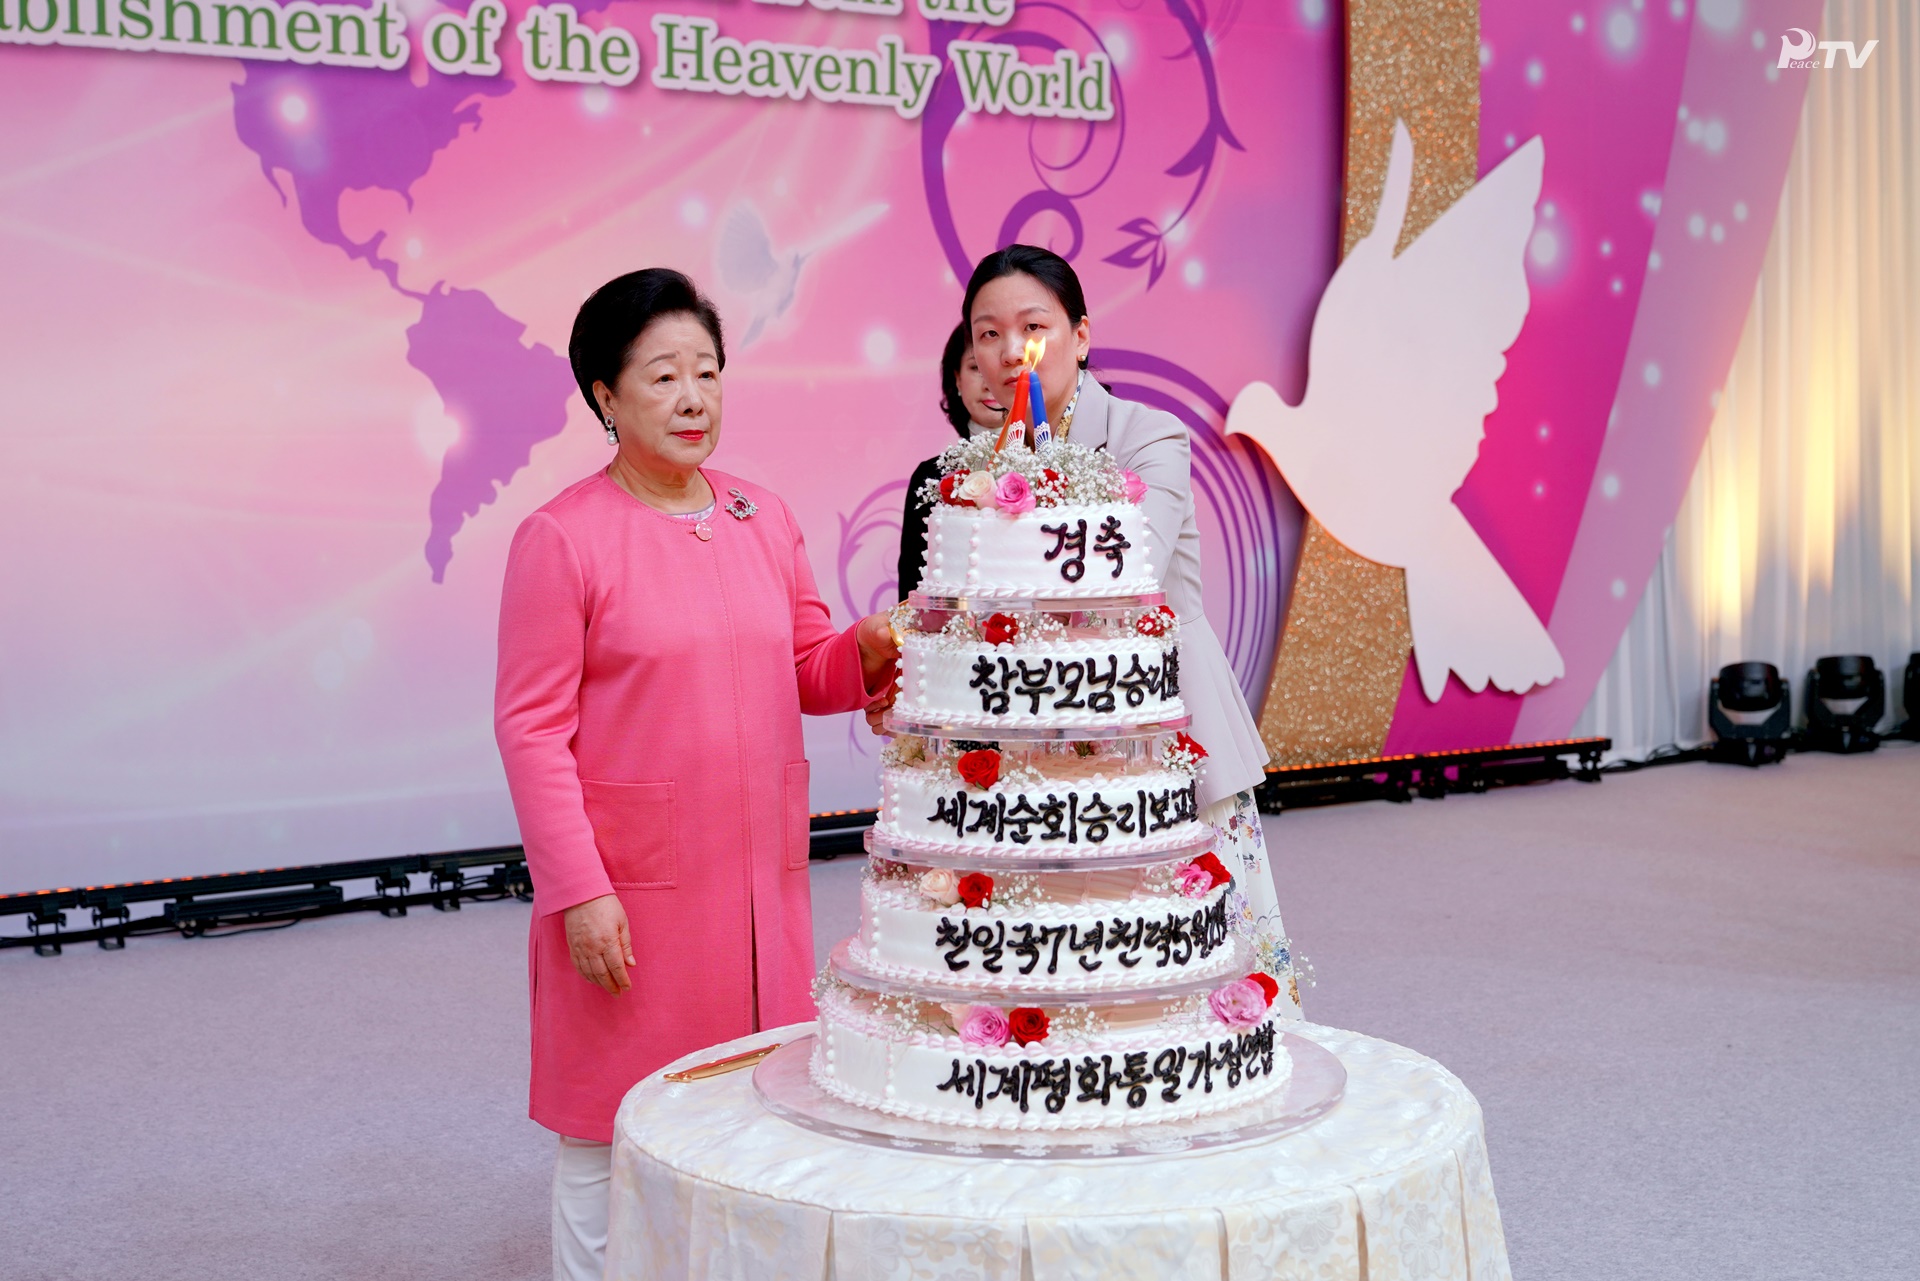 Rally to Celebrate True Parents’ Victorious Return from 2019 World Tour for the Firm Establishment of the Heavenly World (June 29, 2019)